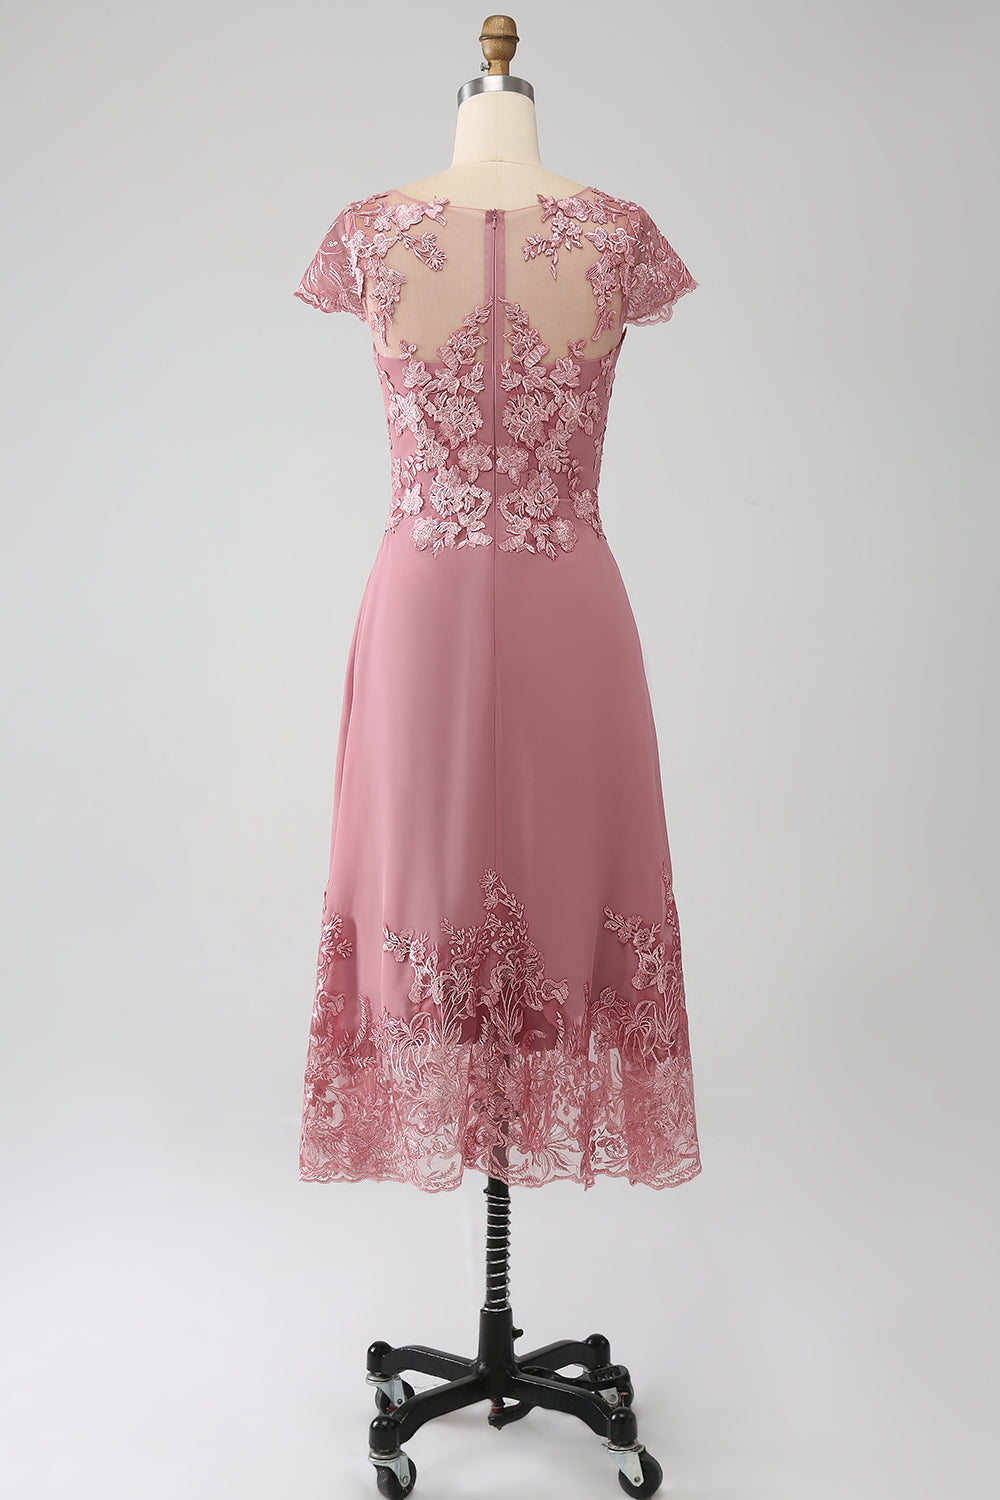 Dusty Rose A-Line Tea-Length Mother of the Bride Dress With Appliques